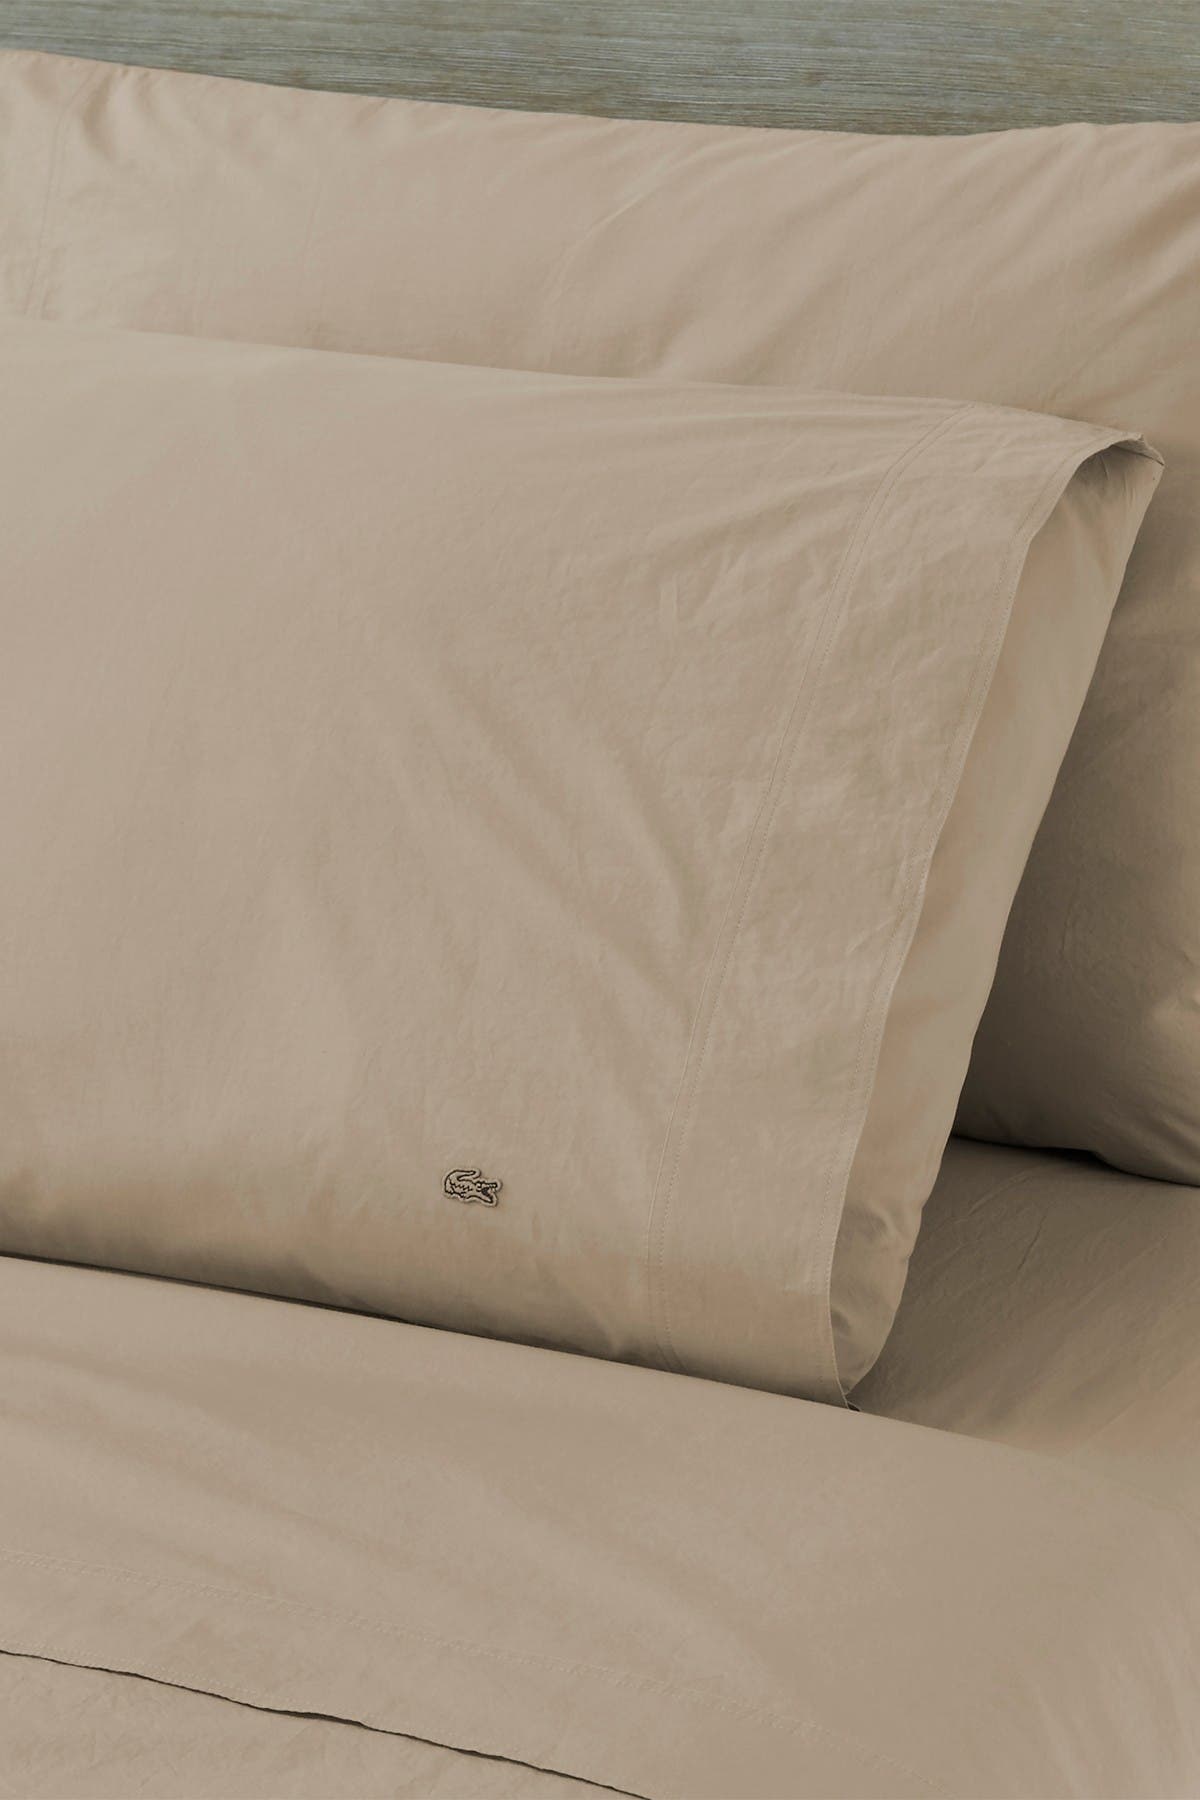 lacoste percale sheets